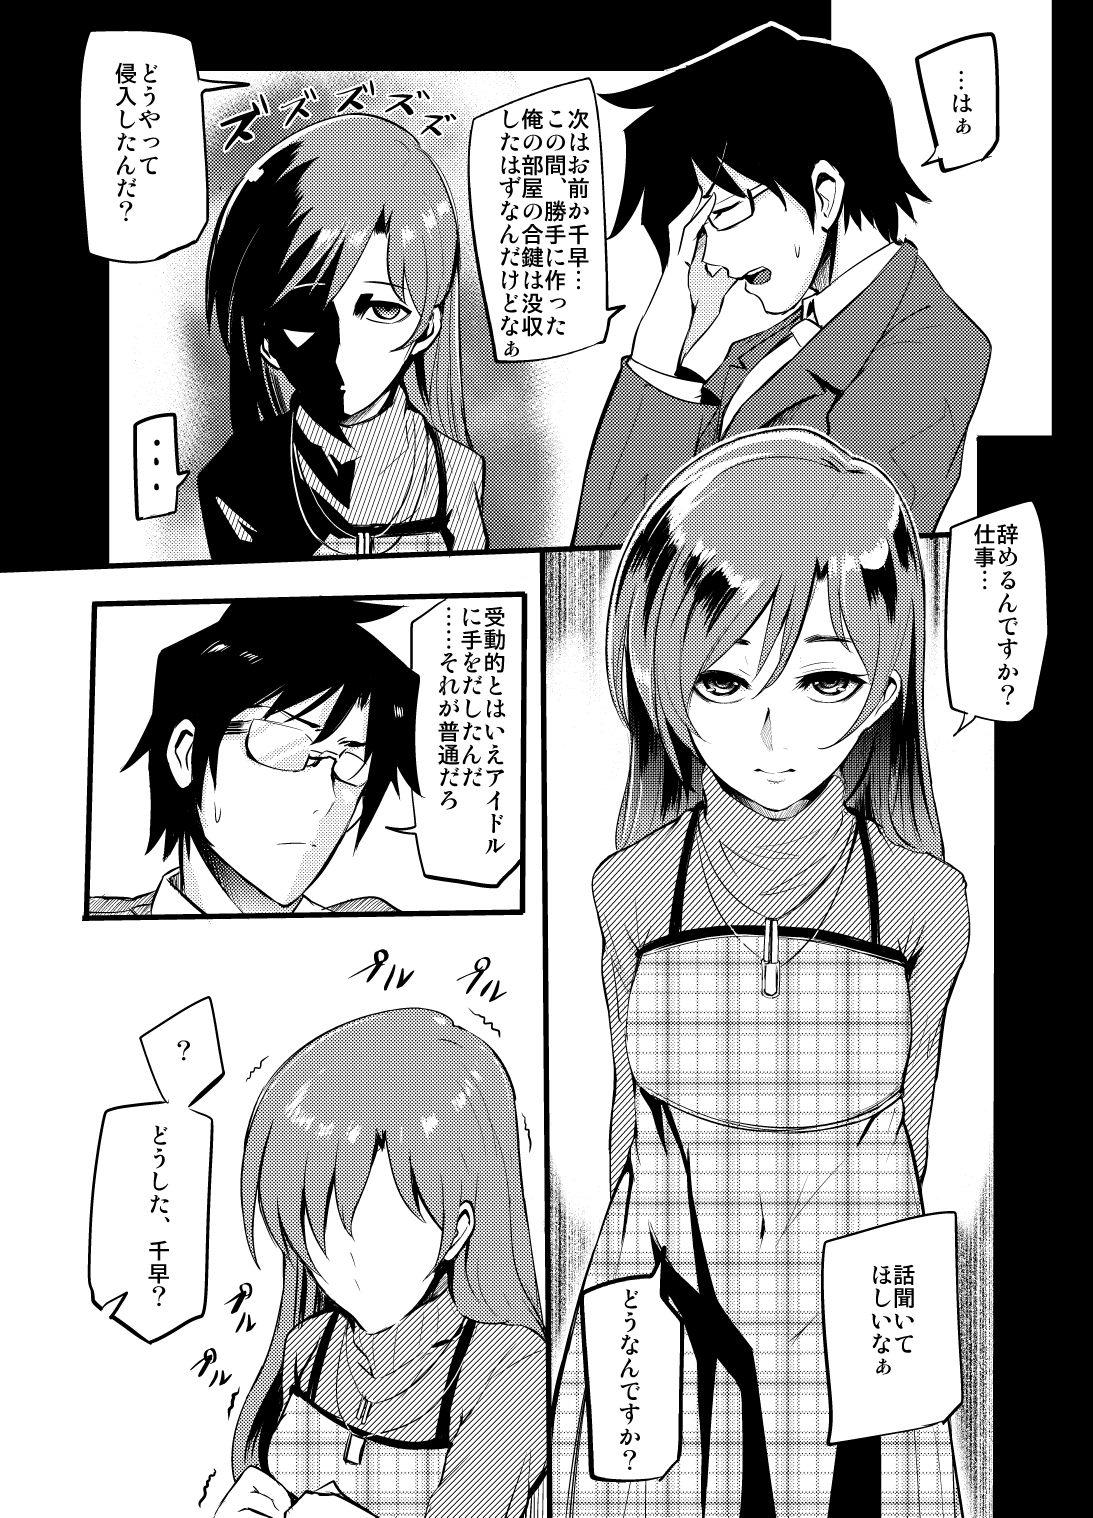 Asian THEYANDEREM@STER - The idolmaster Gaystraight - Page 3